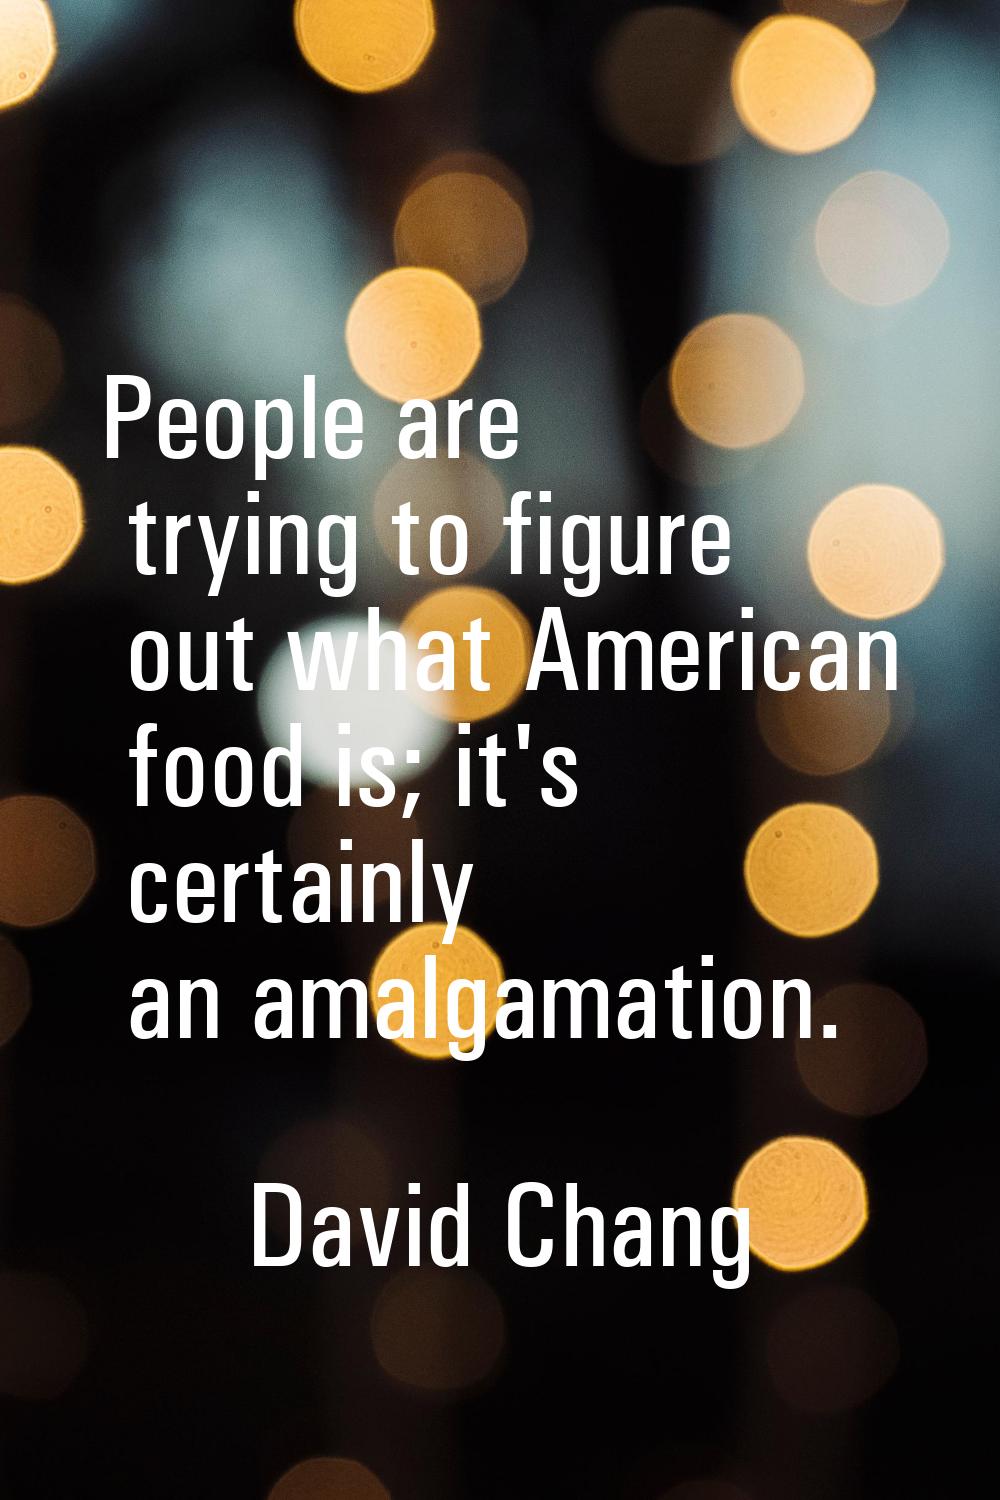 People are trying to figure out what American food is; it's certainly an amalgamation.